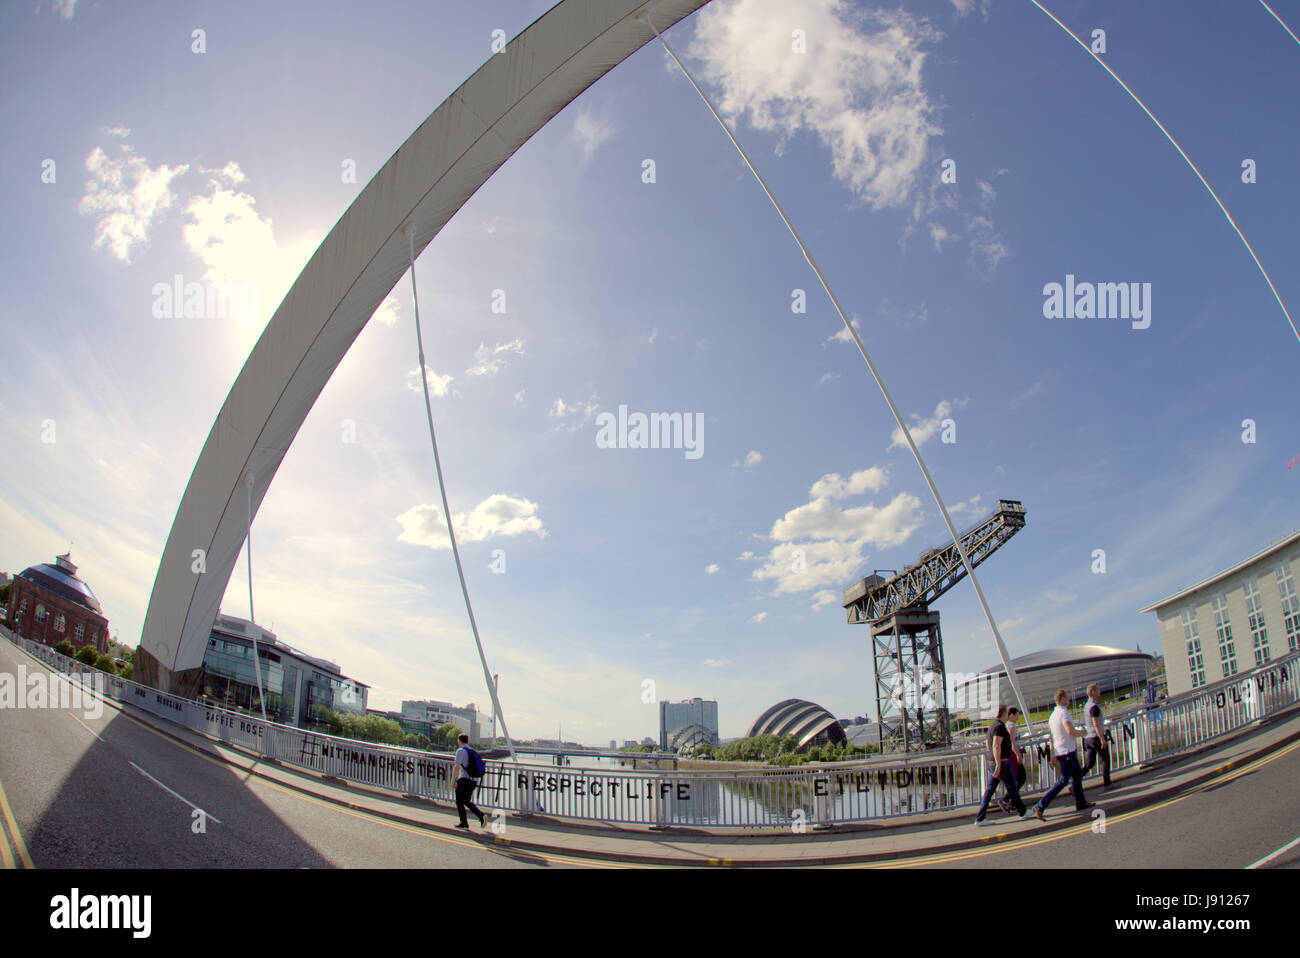 Glasgow, Scotland, UK 31st May,Tribute to Manchester bombing victims appears on Clyde Bridge. The Squinty  Bridge at the Pacific Quay home of the Scottish media community was covered in the names  of all of the Manchester bombing victims overnight by a mystery artist. Gerard Ferry/Alamy Live News Stock Photo